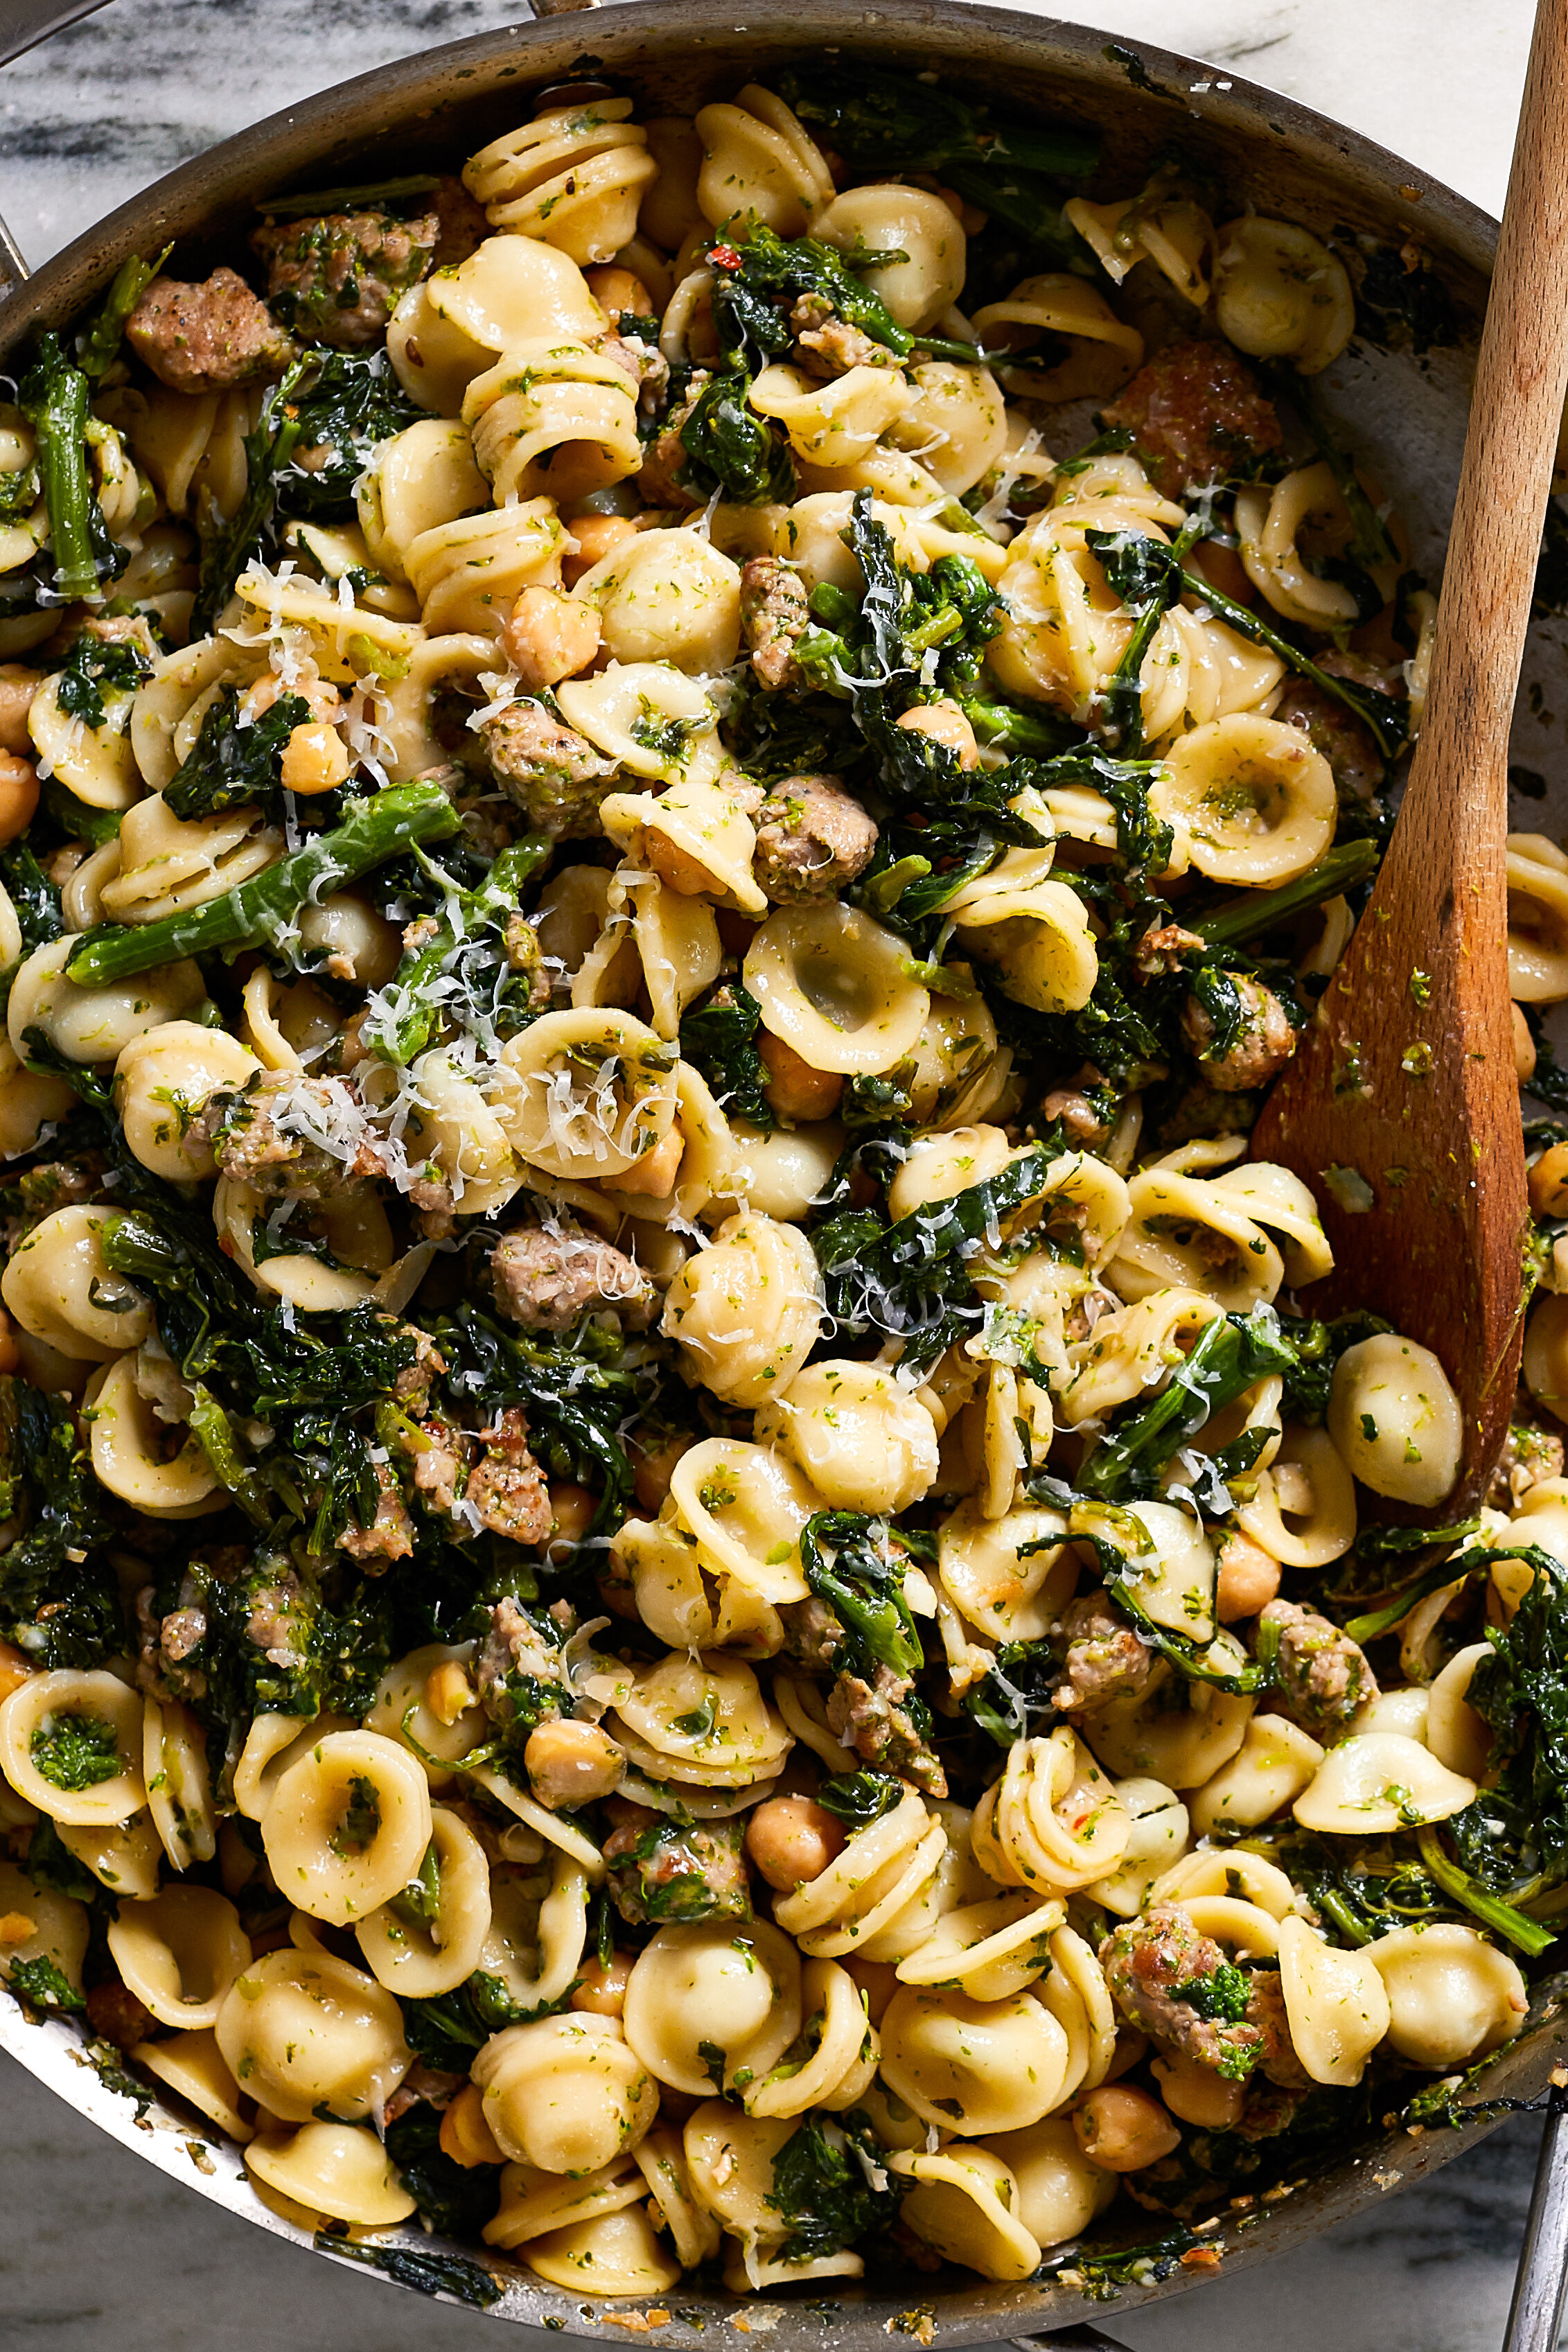  Skillet Pasta with sausage, chickpeas, broccoli rabe and parm NYT Cooking 